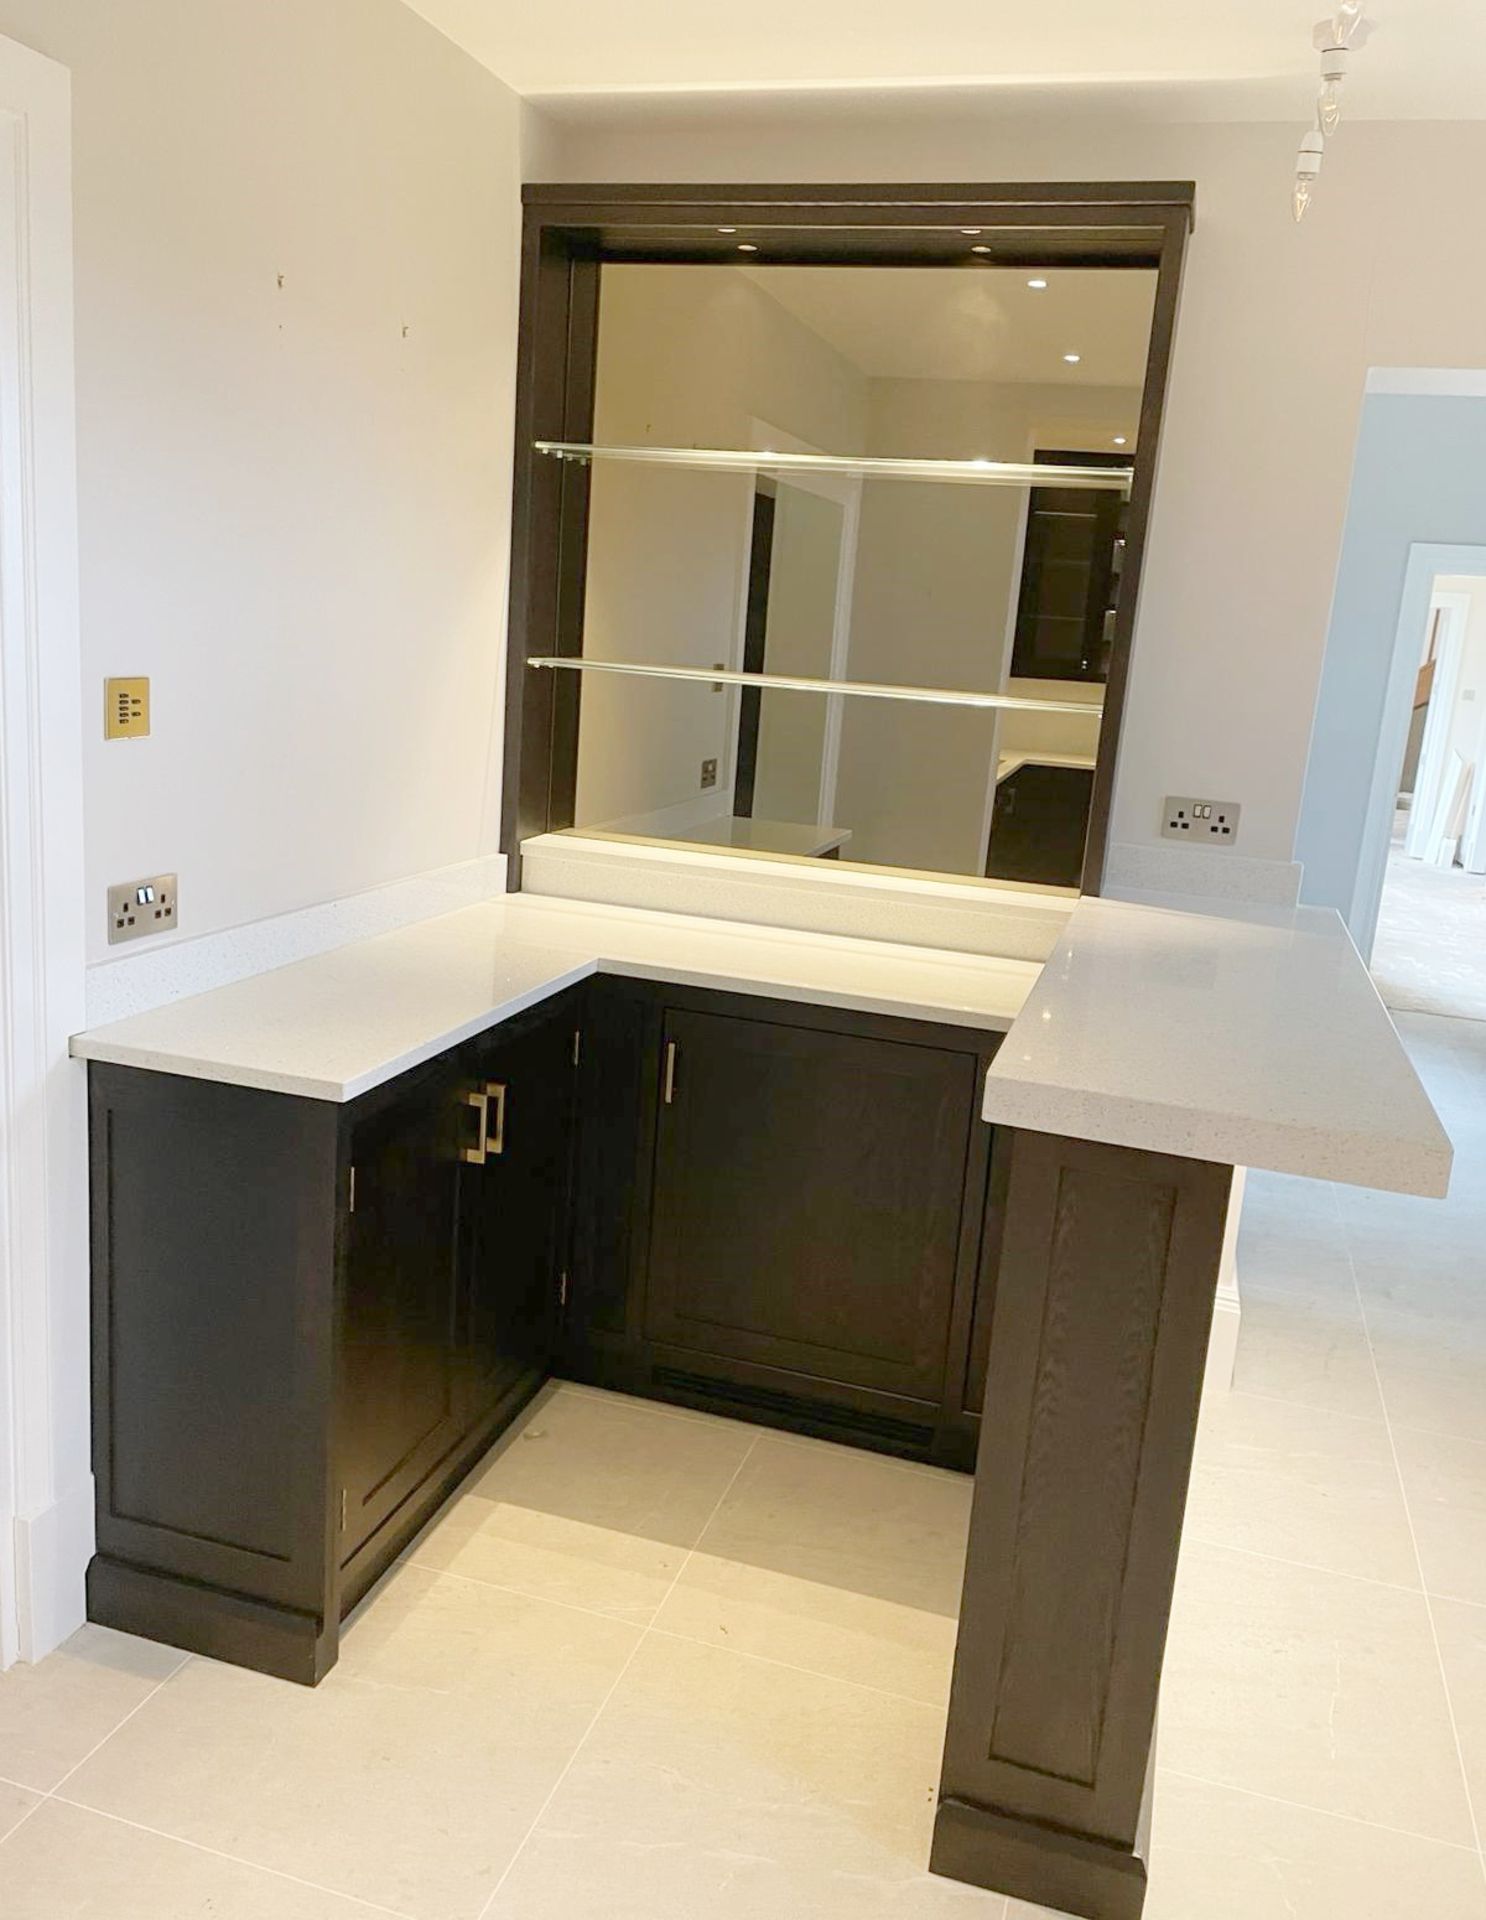 1 x Small Bespoke Fitted Luxury Home Bar with White Terrazzo Quartz Counter - Image 2 of 19